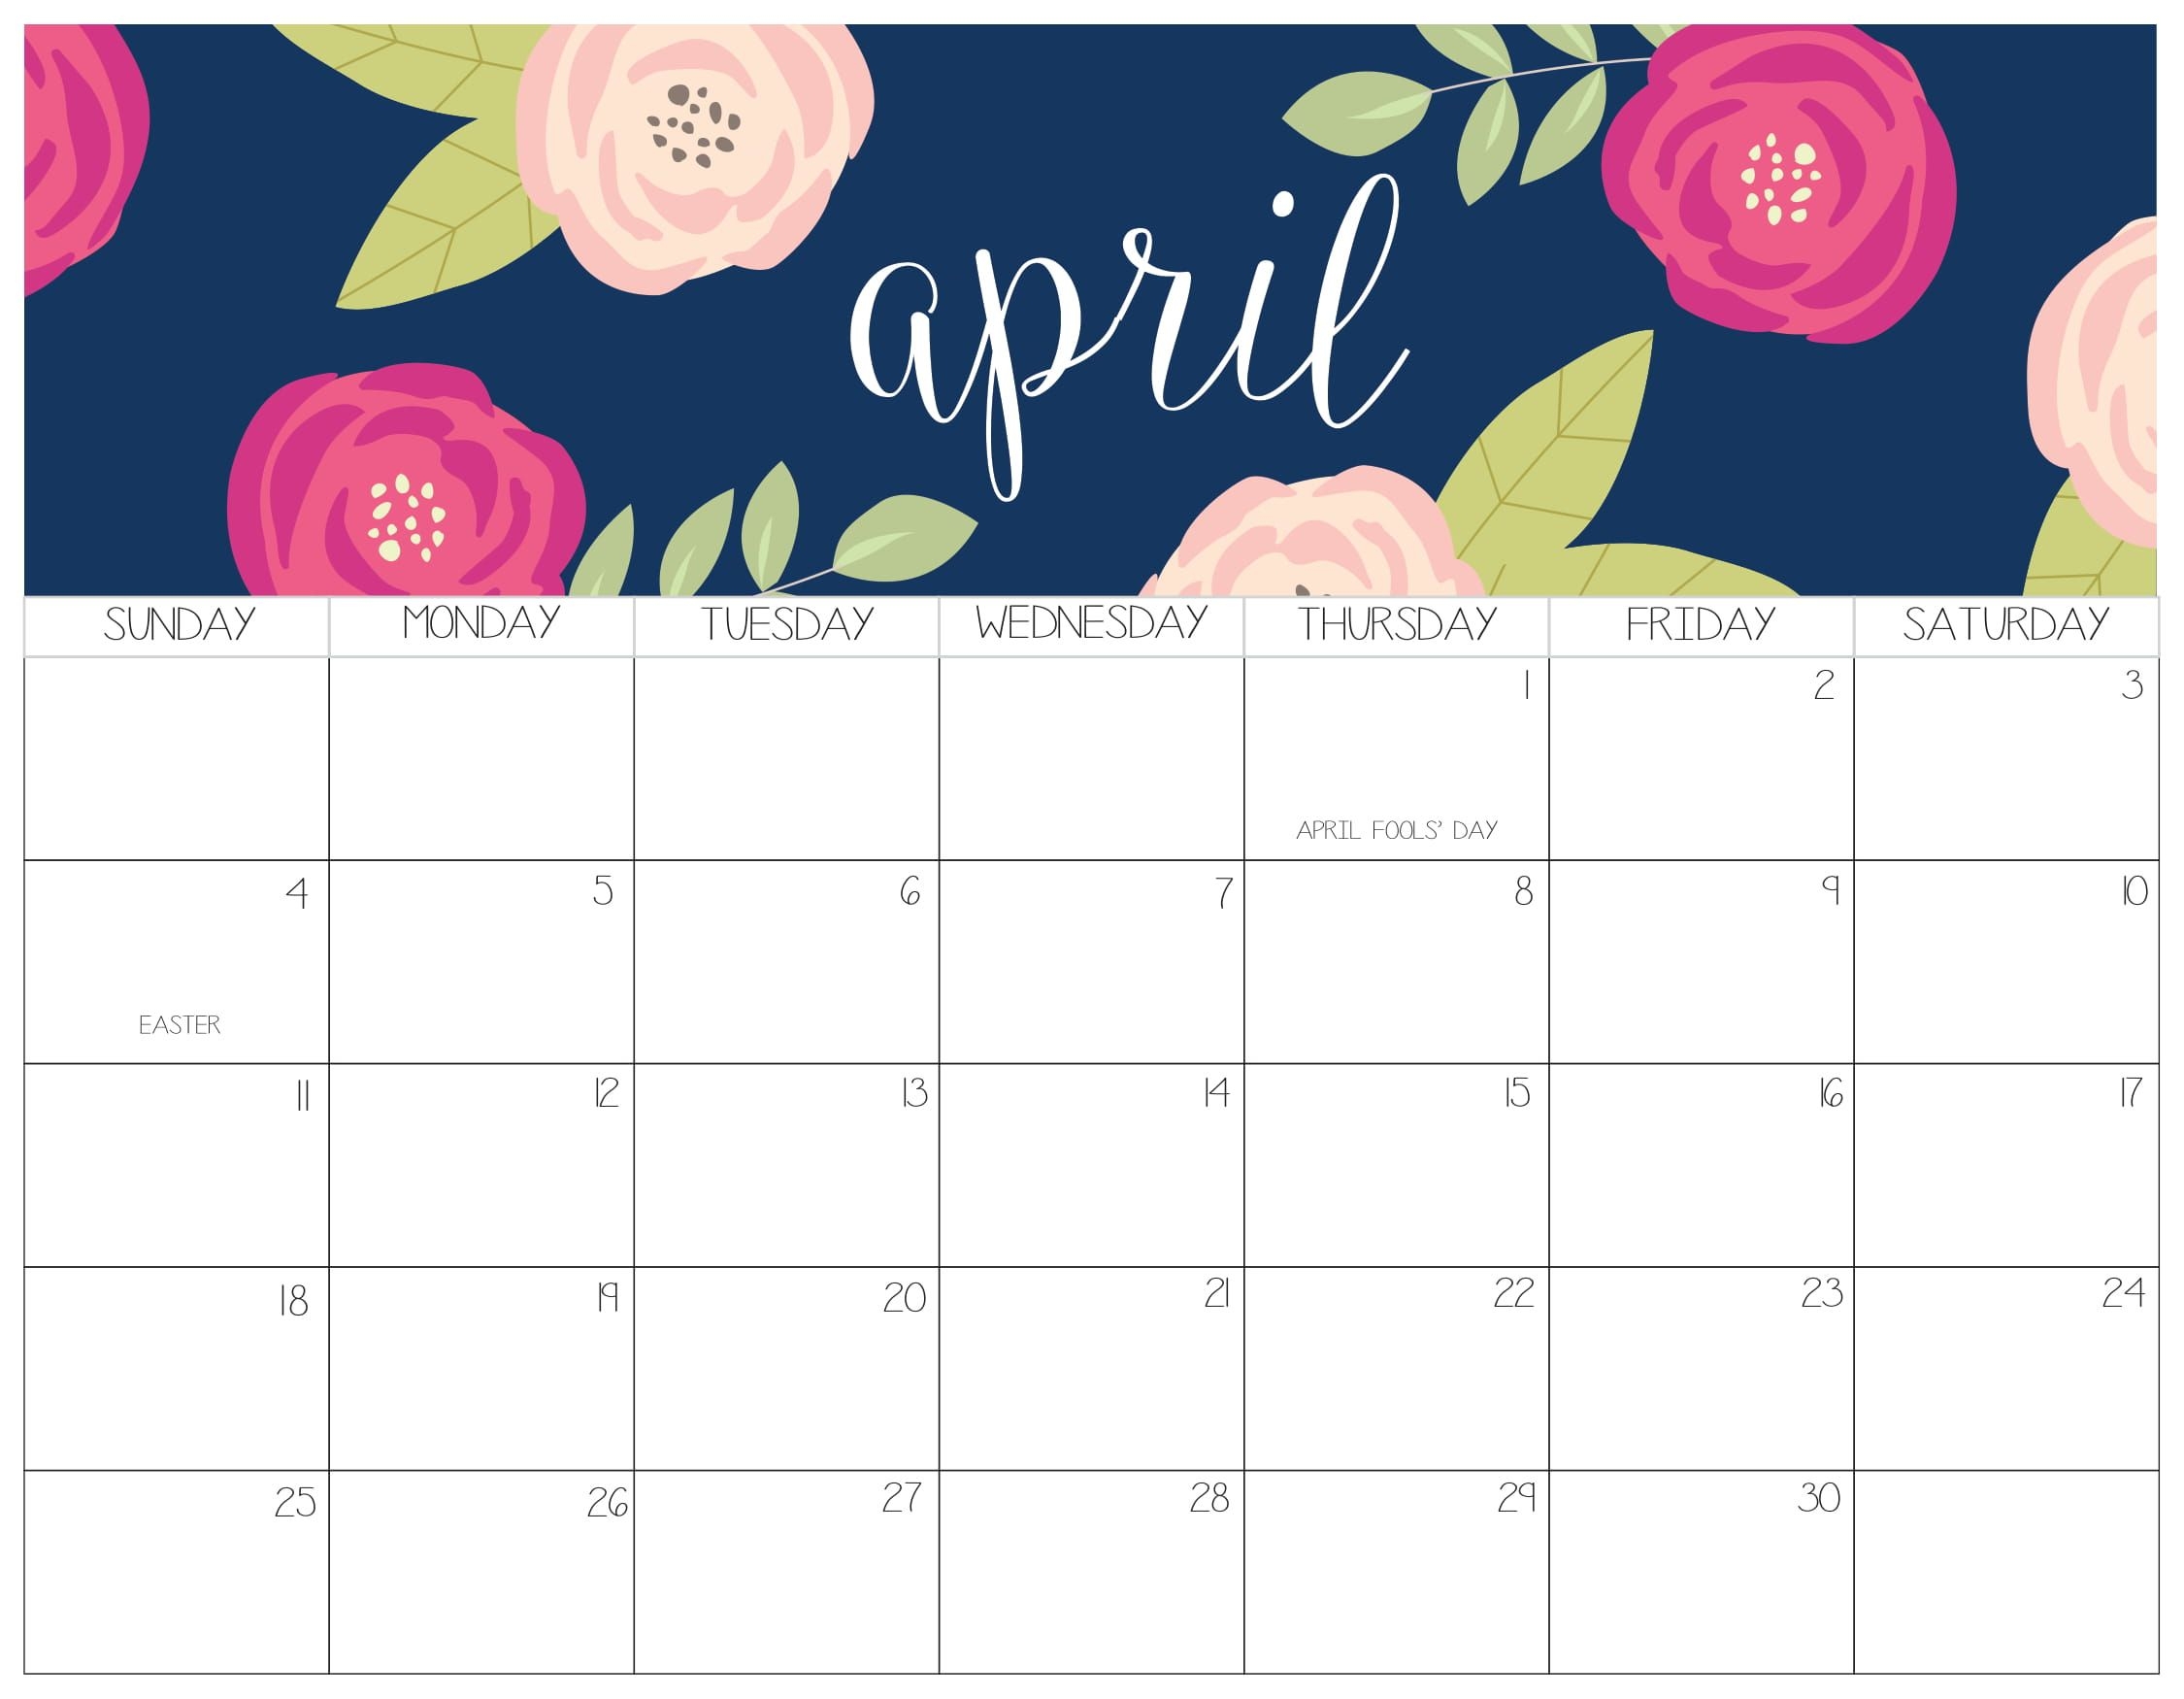 April 2021 - Calendar April 2021 To March 2022 / In Our